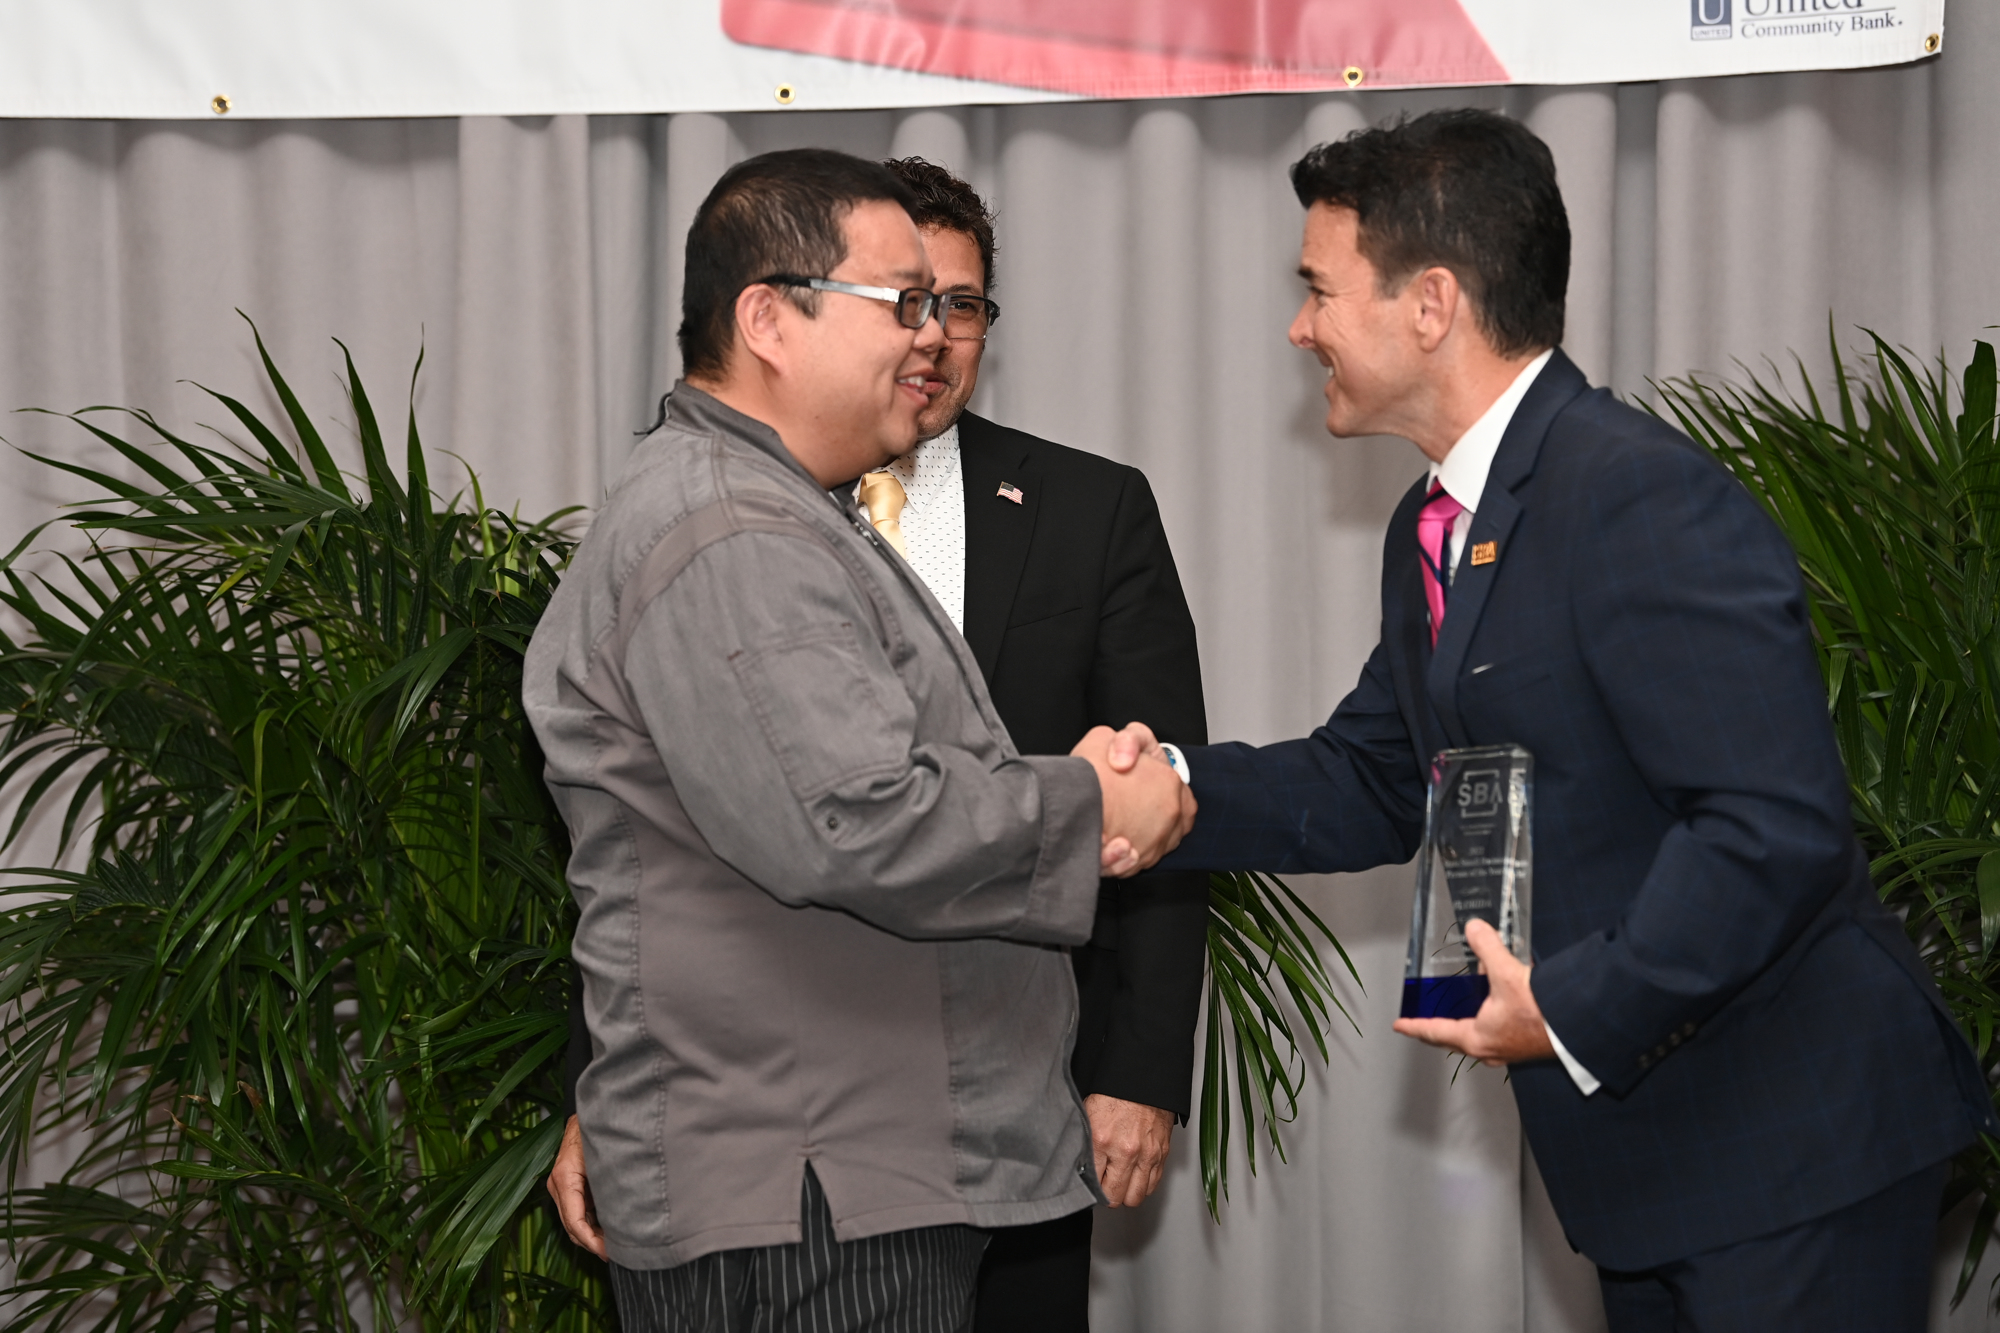 Dennis Chan accepts his award from U.S. Small Business Administration Region IV Administrator Allen Thomas. (Florida SBDC)